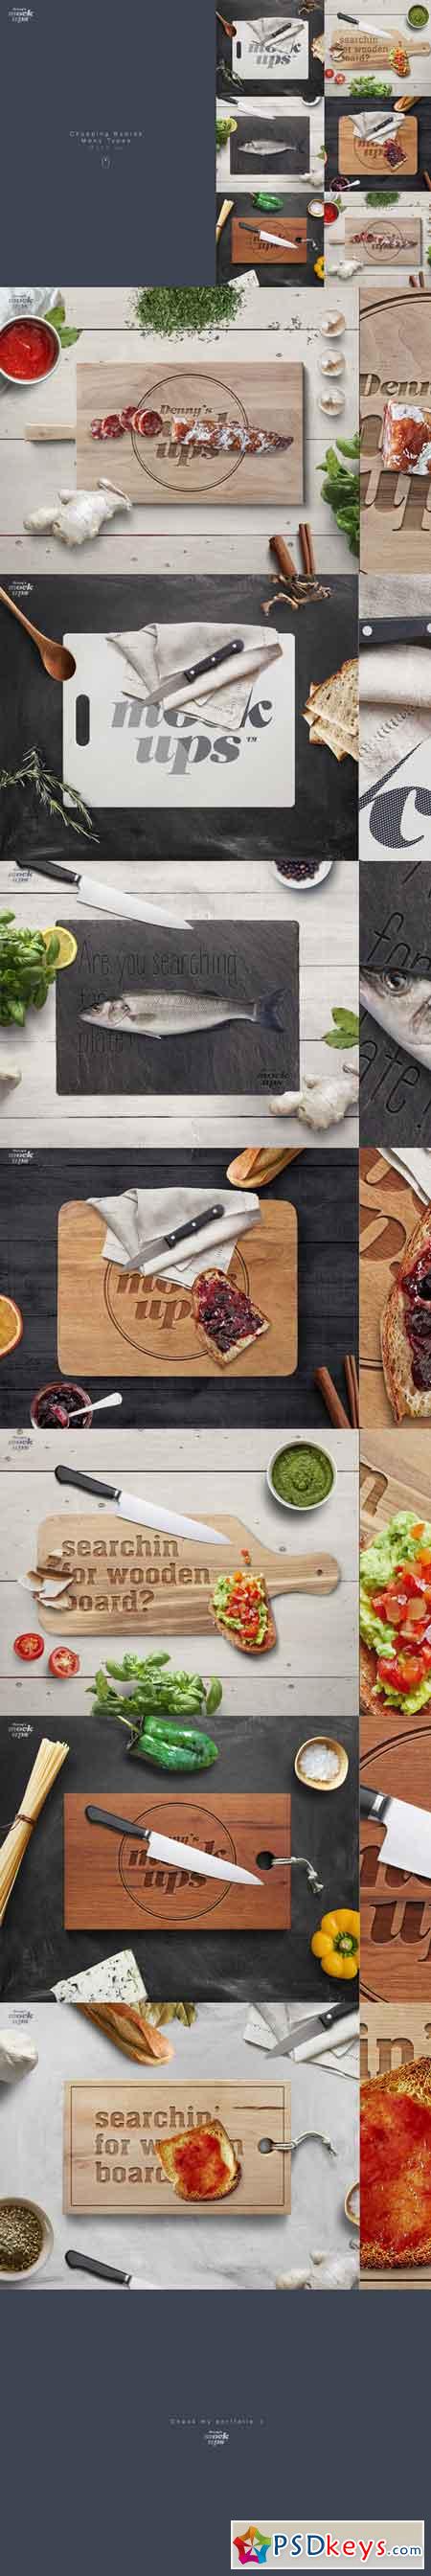 Download Cutting Board Many Types Mockup 791229 » Free Download Photoshop Vector Stock image Via Torrent ...